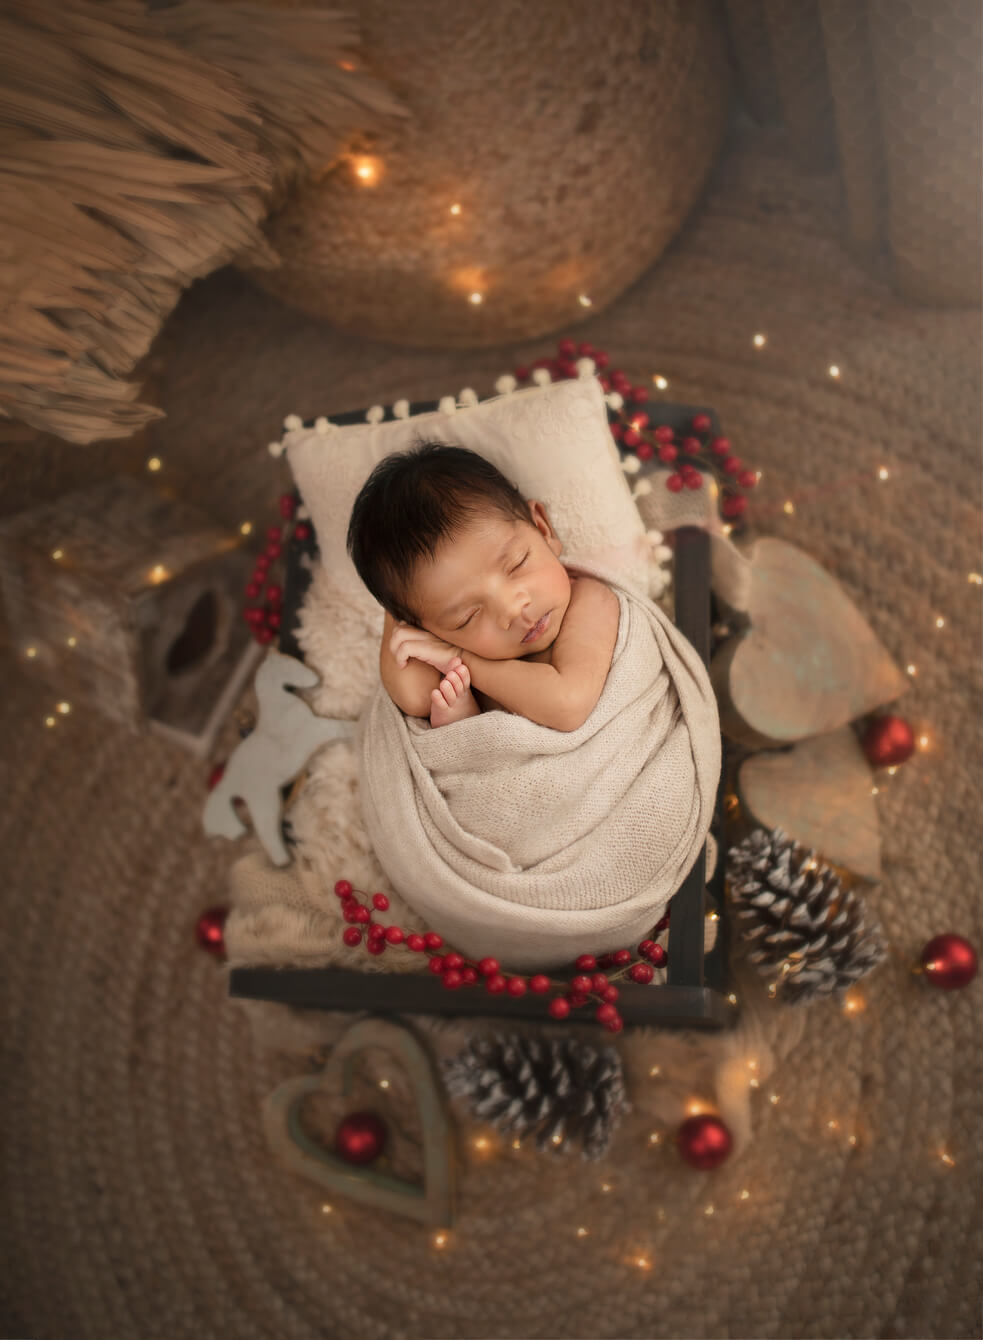 Book your Newborn Photoshoot from Ambica Photography, the best Newborn Baby Photographers in Bangalore in creating amazing pictures of the precious darlings